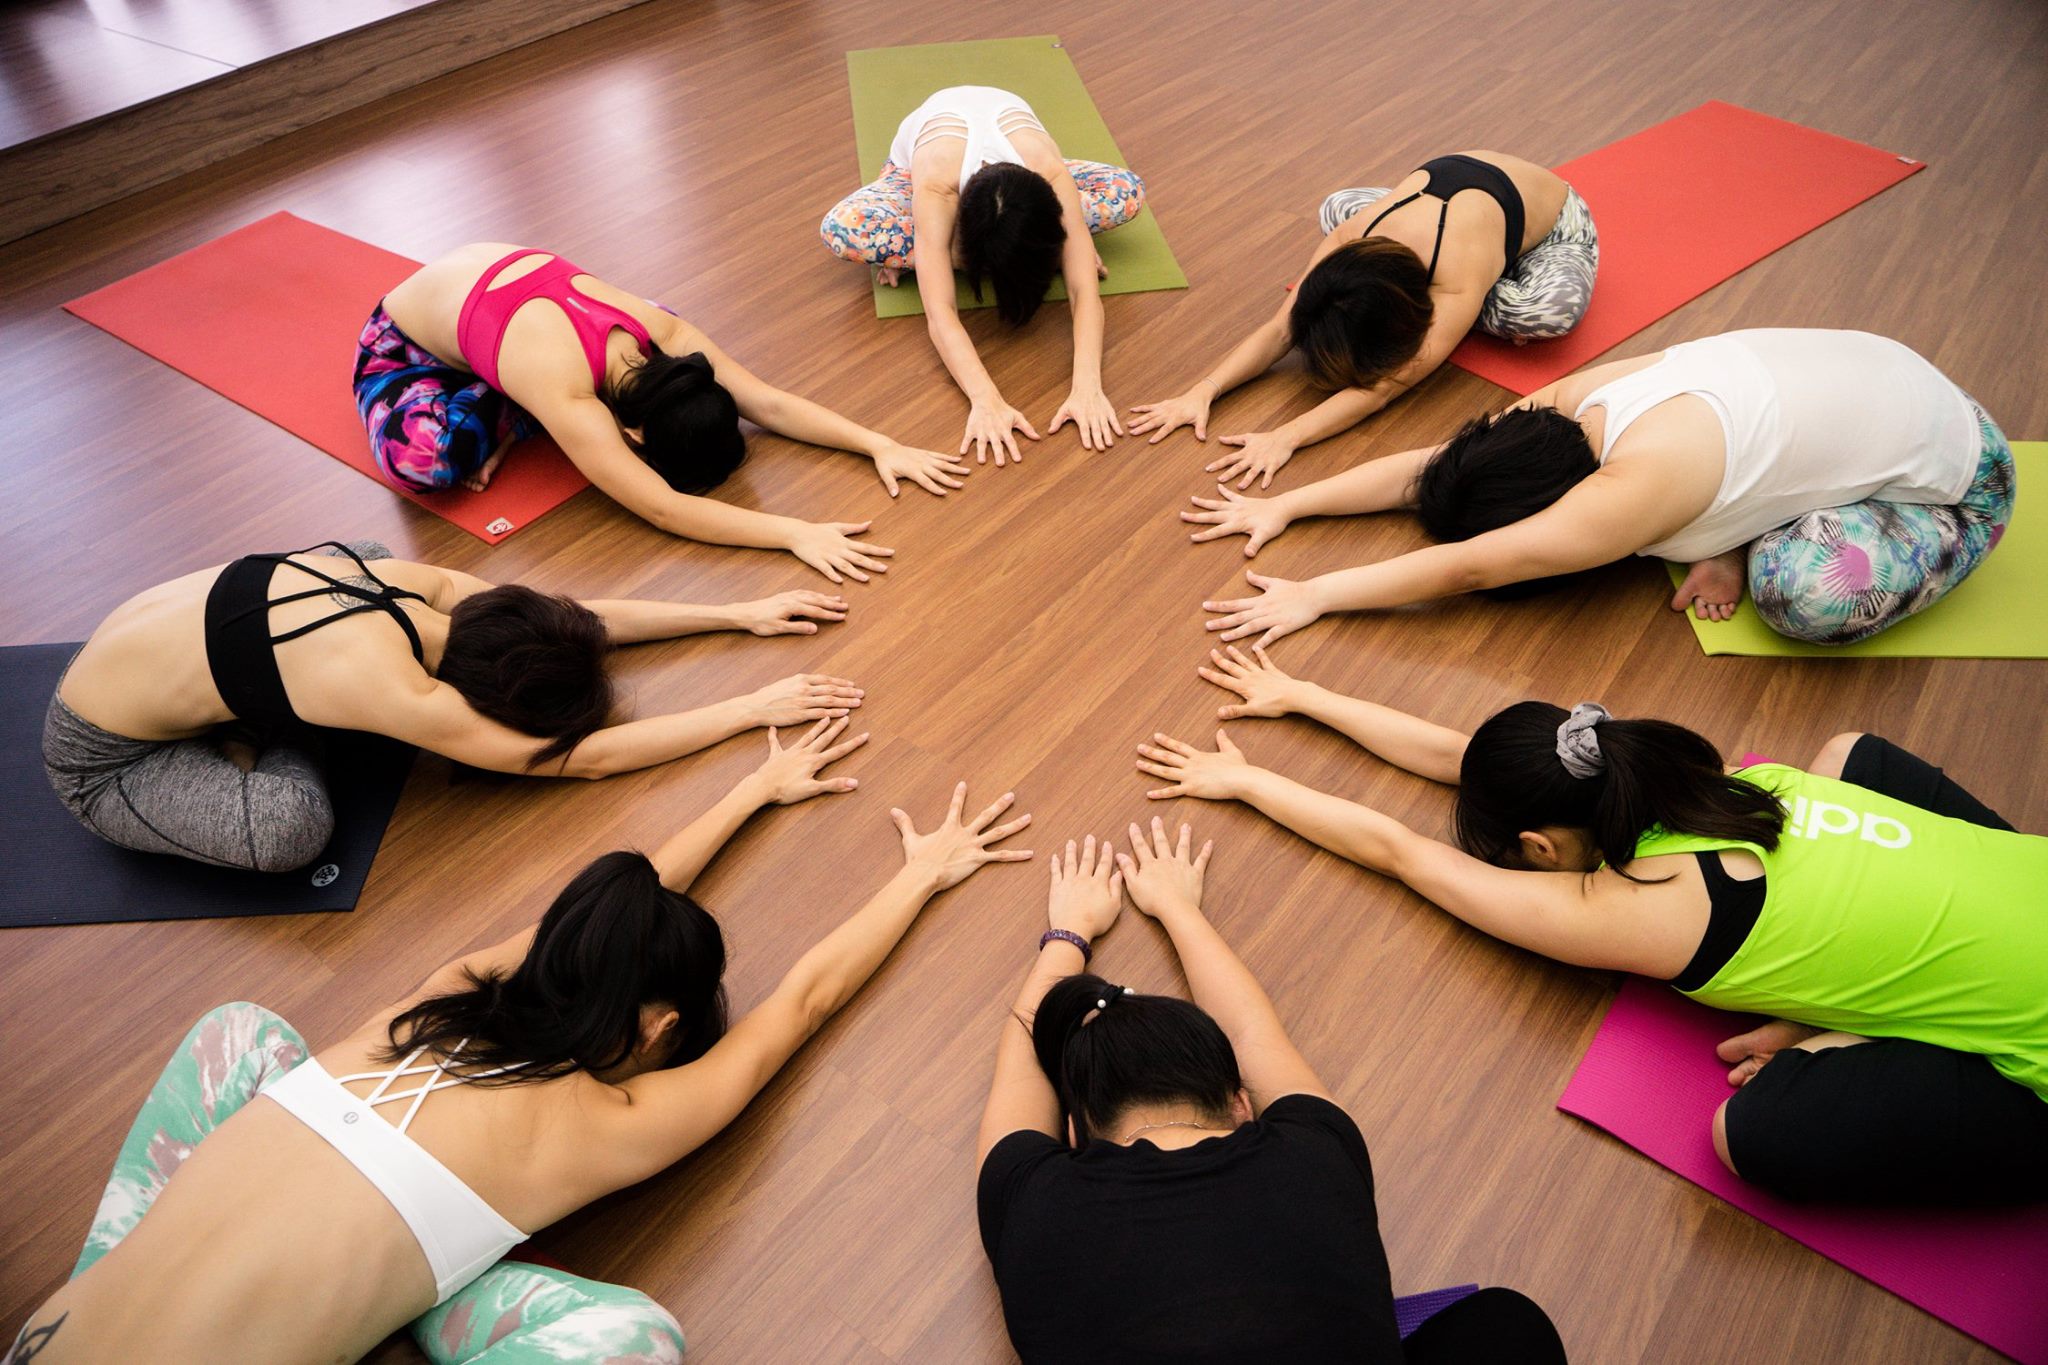 12 Yoga Studios to Improve Your Physical and Mental Health in Johor